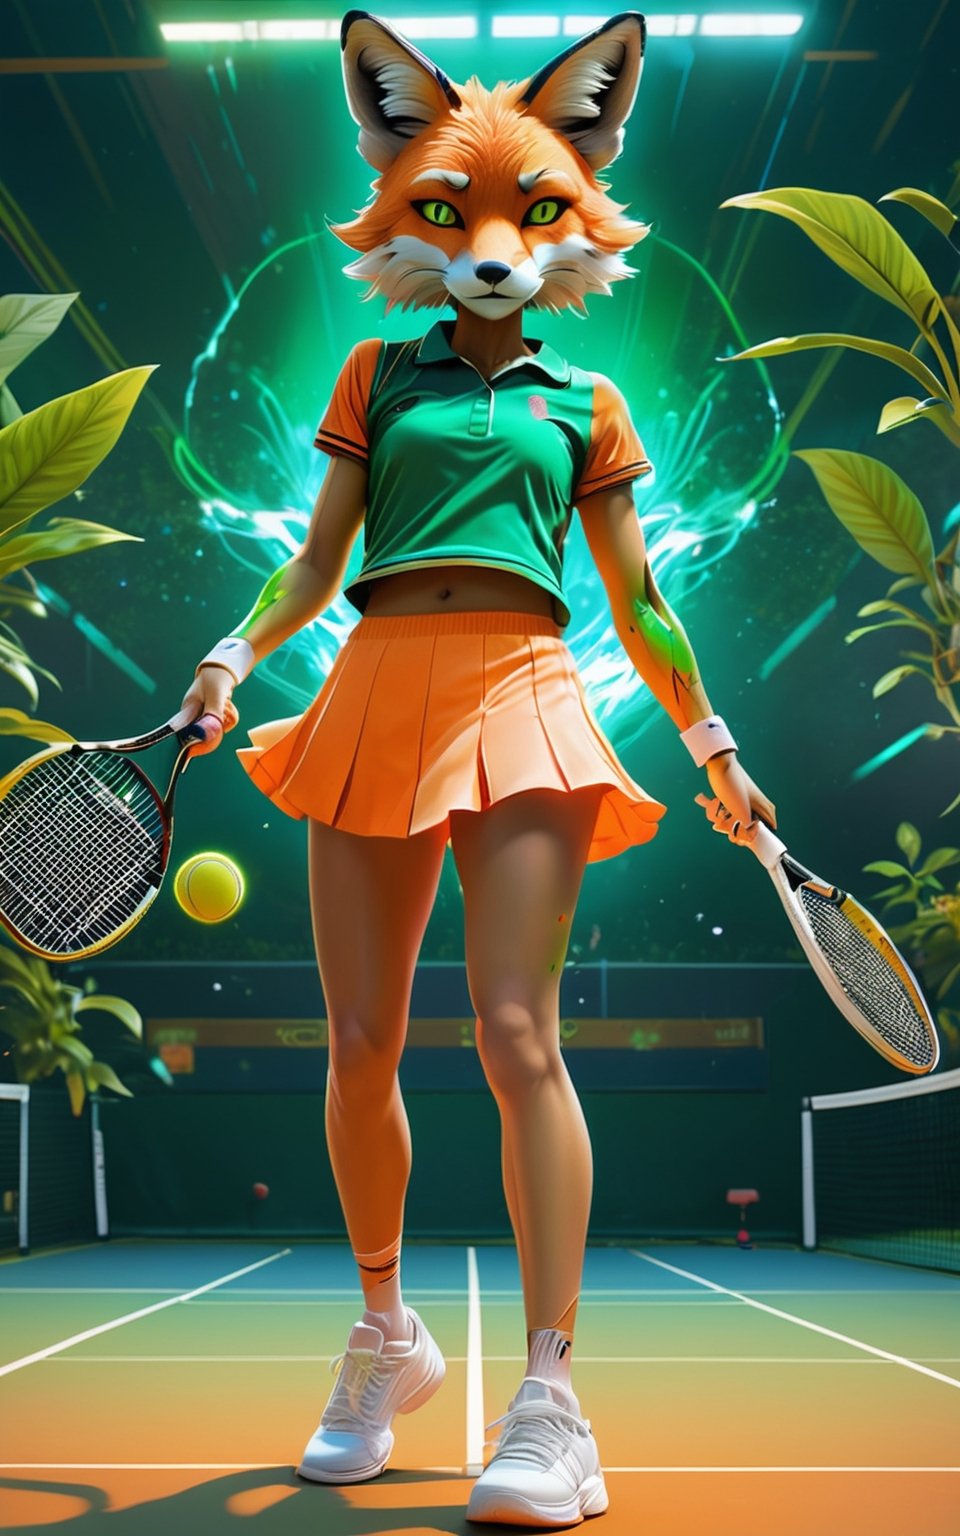 Tiger tennis player in tennis court, (masterpiece:1.1), (highest quality:1.1), (HDR:1.0), extreme quality, cg, (negative space), detailed face+eyes, 1girl, fox ears, (plants:1.18), (fractal art), (bright colors), splashes of color background, colors mashing, paint splatter, complimentary colors, neon, compassionate, electric, limited palette, synthwave, fine art, tan skin, full body, (green and orange:1.2), time stop, sy3, SMM